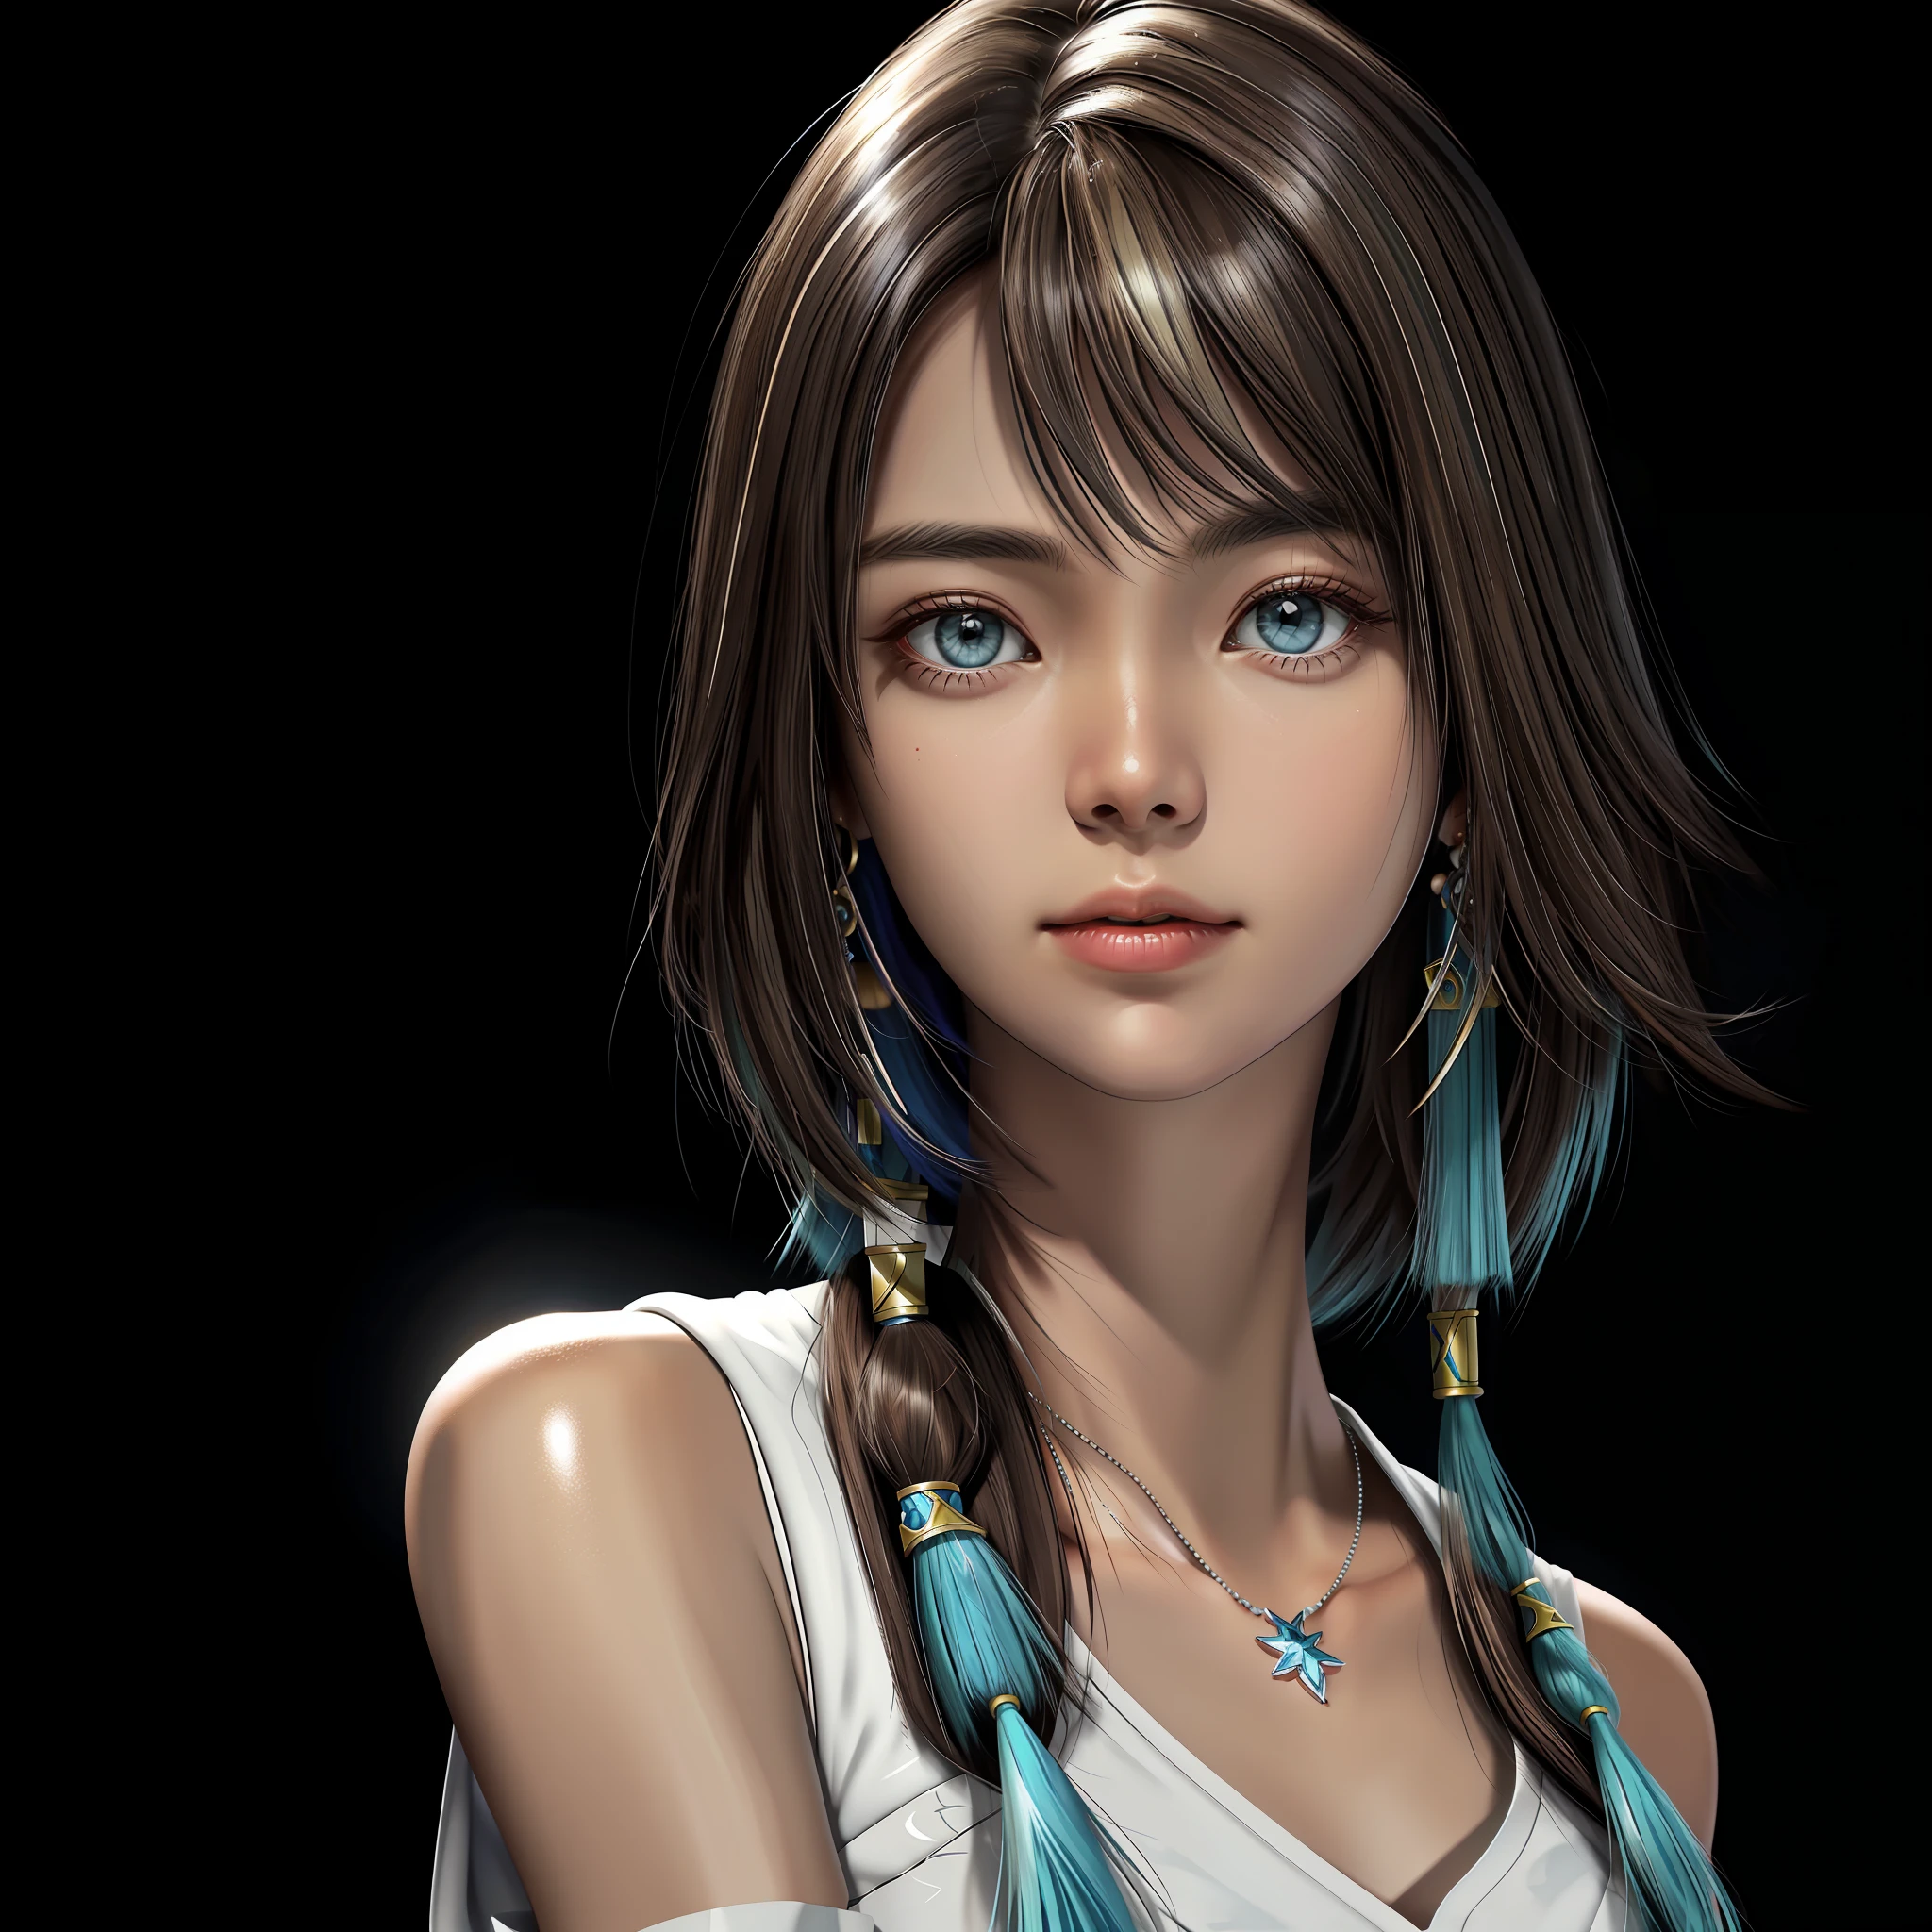 1 Girl, Yuna (FFX), Green Left Eye, Blue Right Eye, Odd Eye, Blue Long Tassel Earrings, Highlights in Pupils, Background Shine, Clear Double Eyelids, Big Eyes, Big, Gloss on Face, Gloss on Skin, Gloss on Chest, Deep Cleavage, Photorealistic, High Quality, High Definition, 8K Quality, Cute Woman, Beautiful Woman, Dark Brown Hair, White Background, Empty Background, No Lights